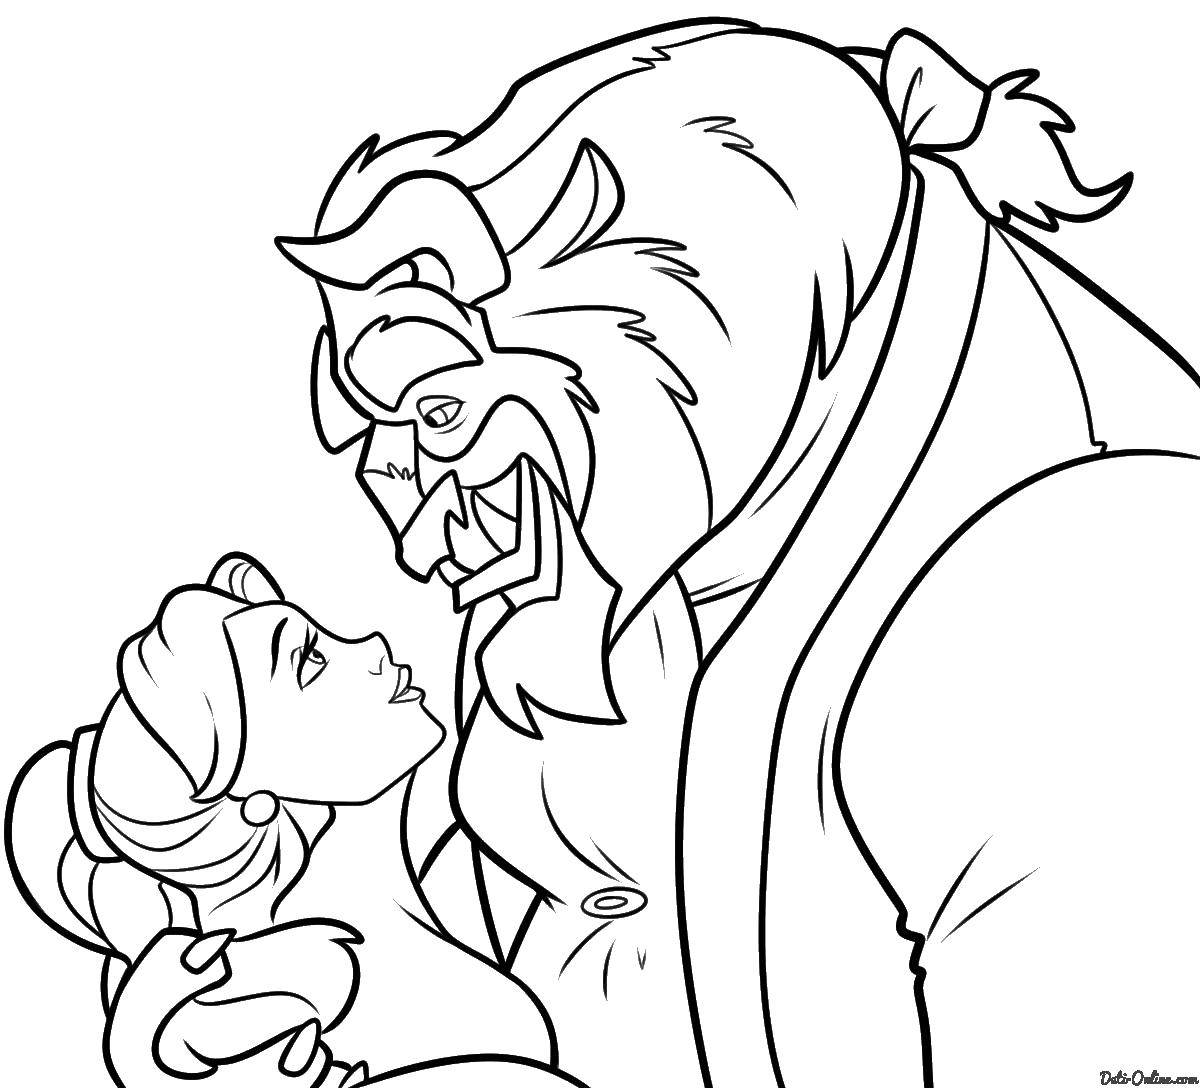 Coloring Beauty and the beast. Category beauty and the beast. Tags:  Disney, "beauty and the beast".